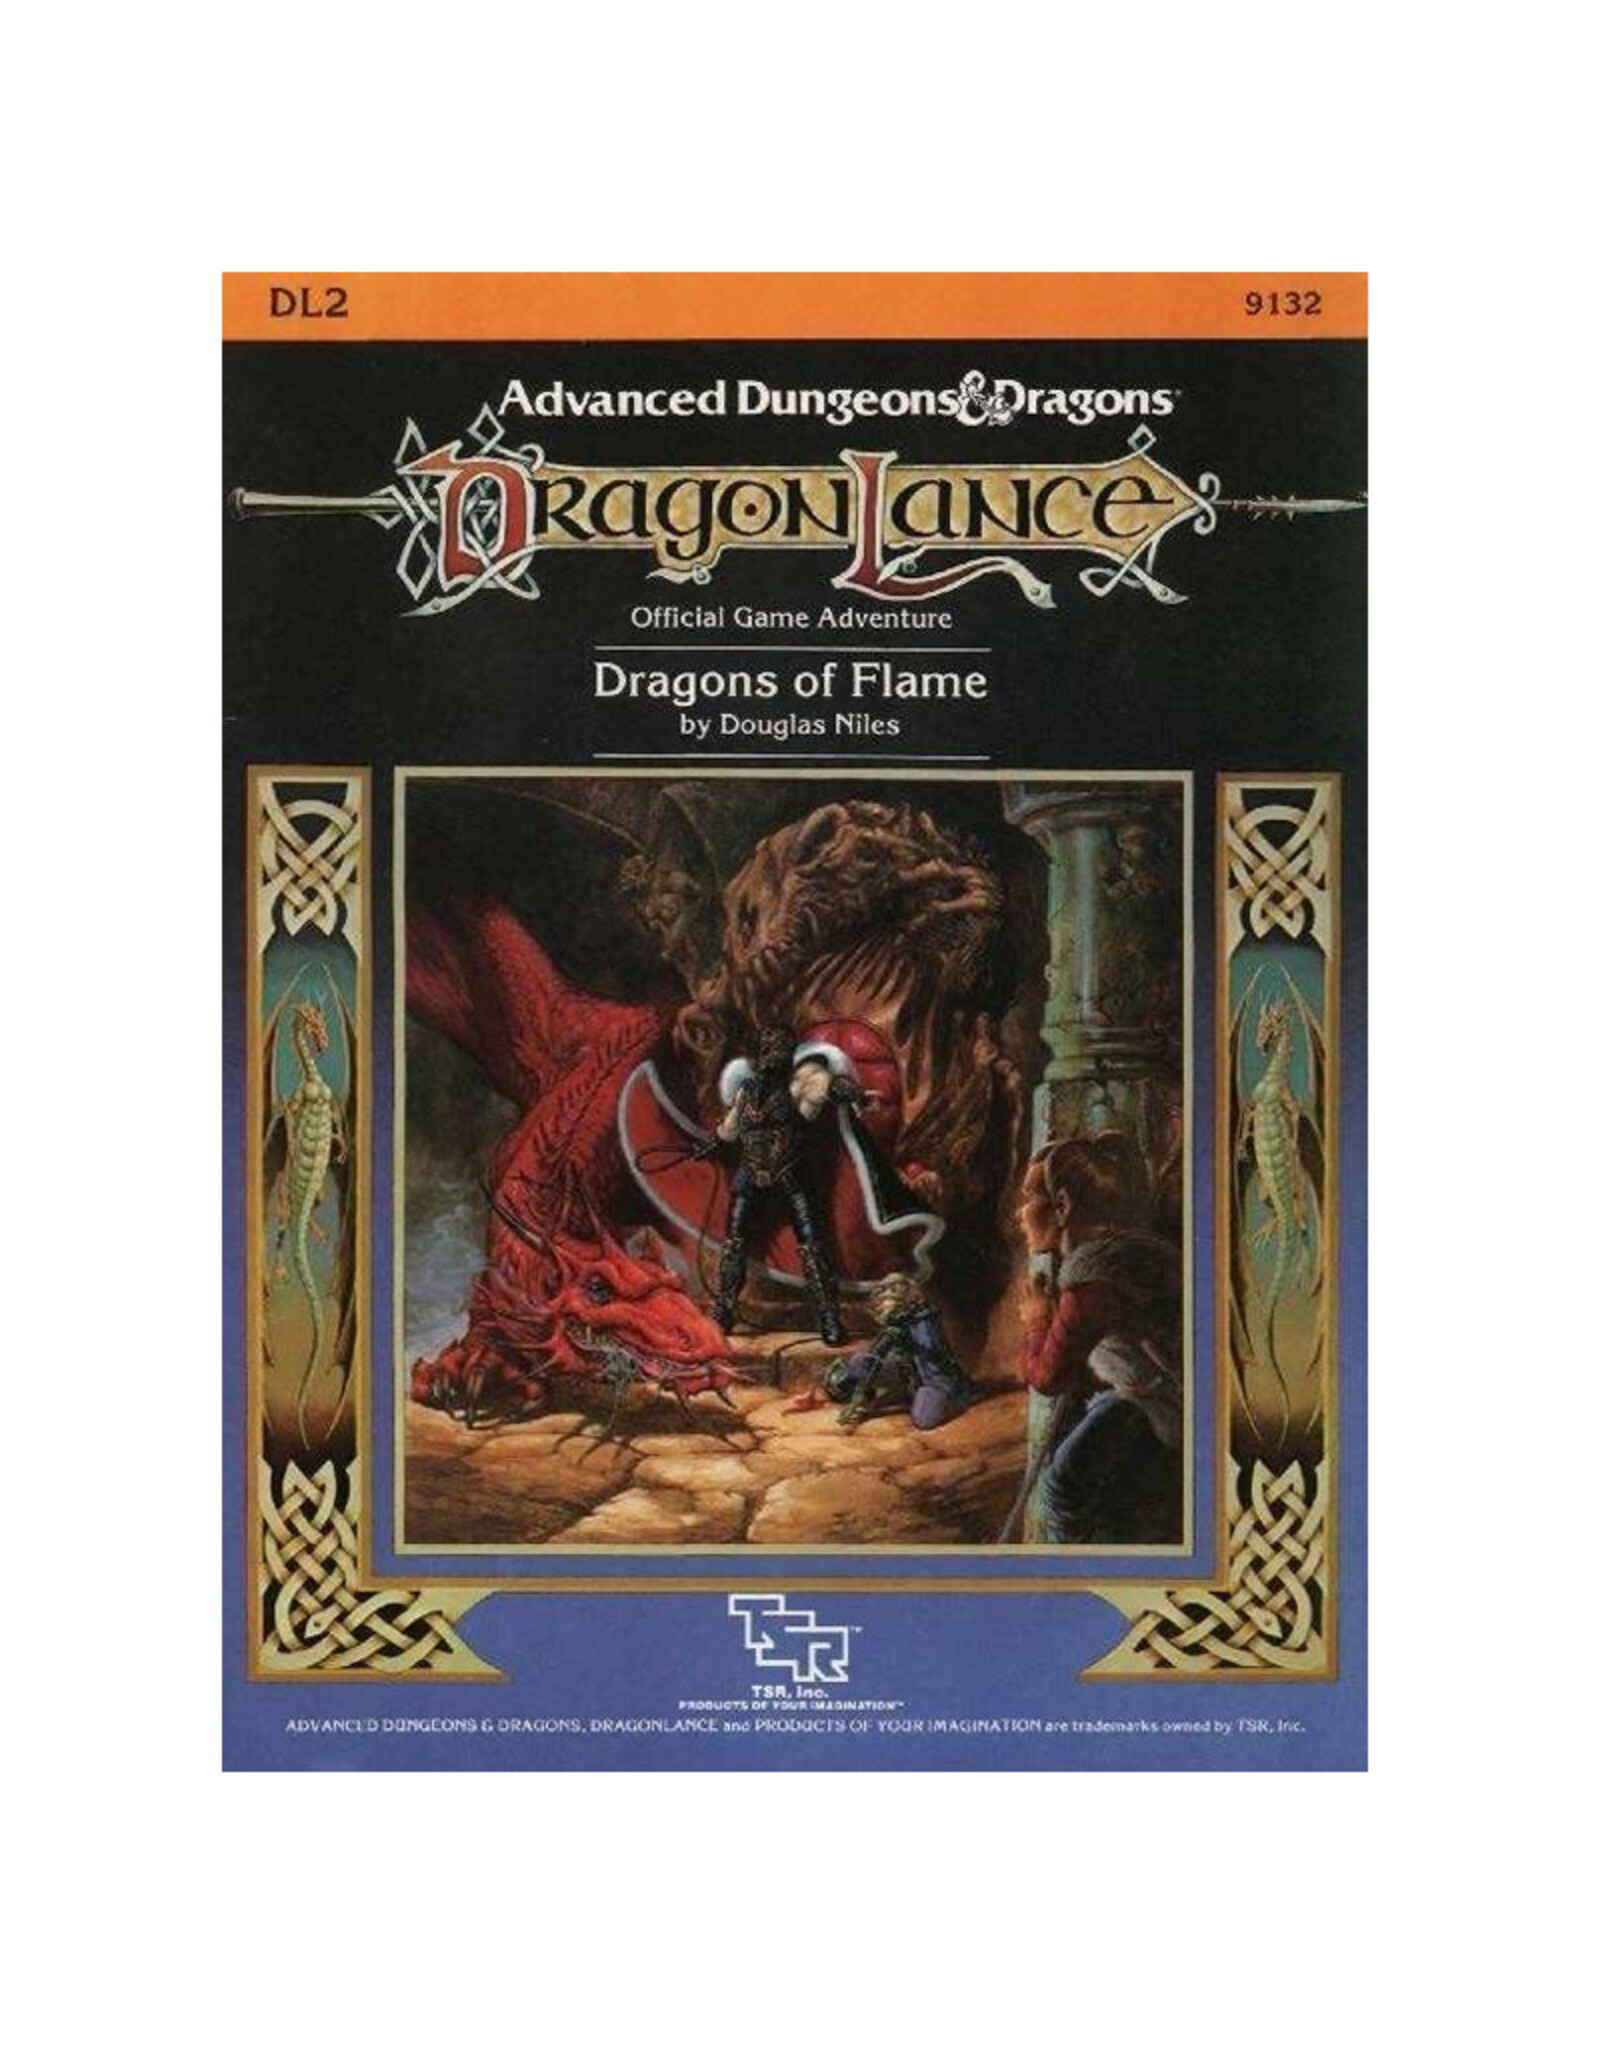 TSR USED - Advanced Dungeons & Dragons Dragon Lance: Dragons of Flame DL2